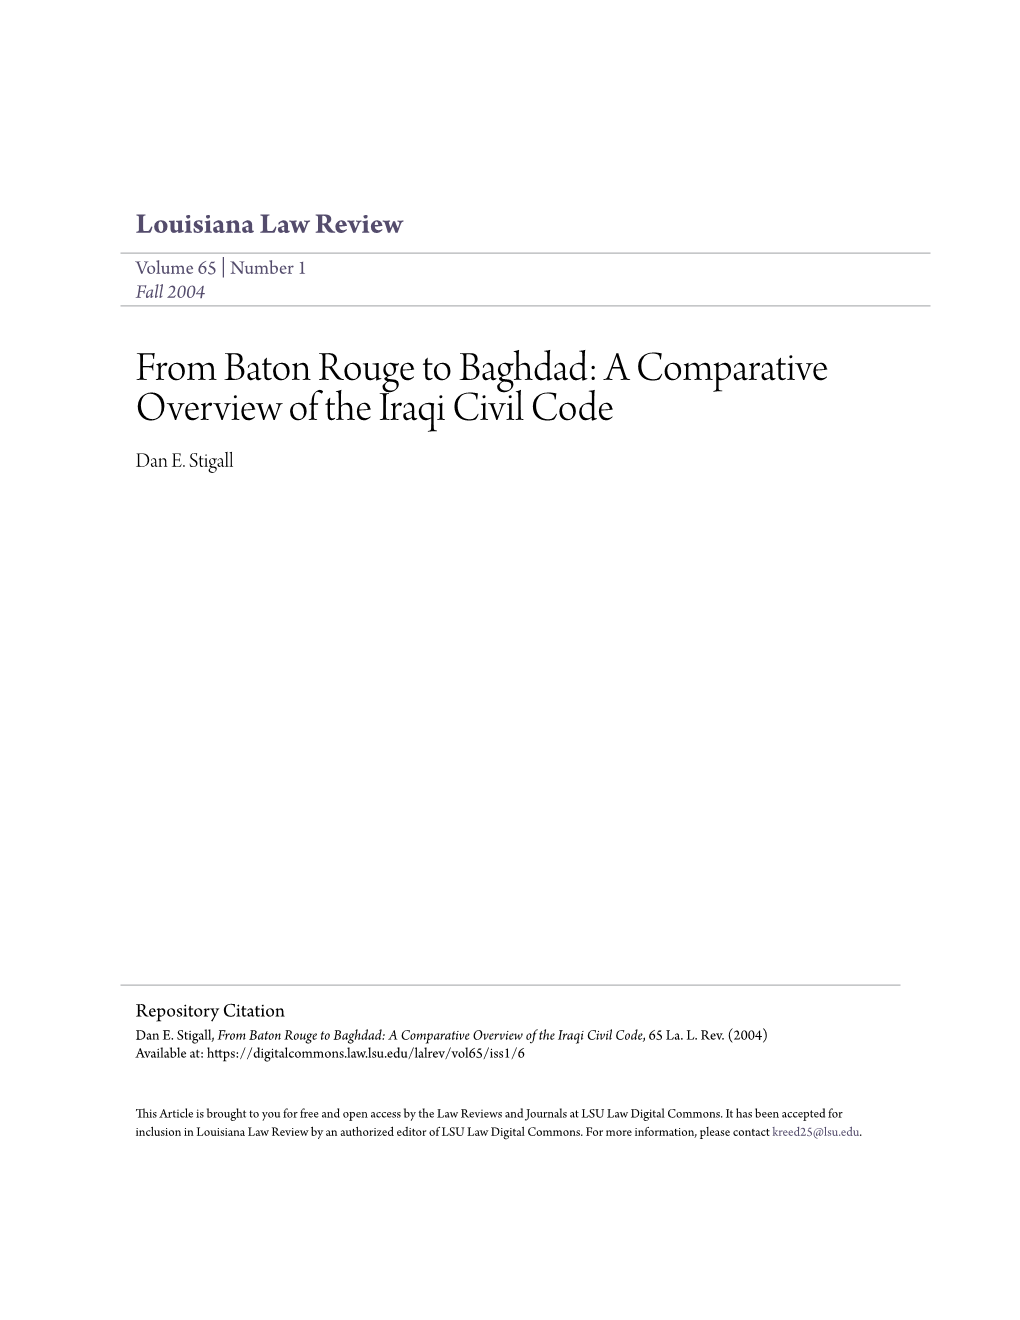 From Baton Rouge to Baghdad: a Comparative Overview of the Iraqi Civil Code Dan E